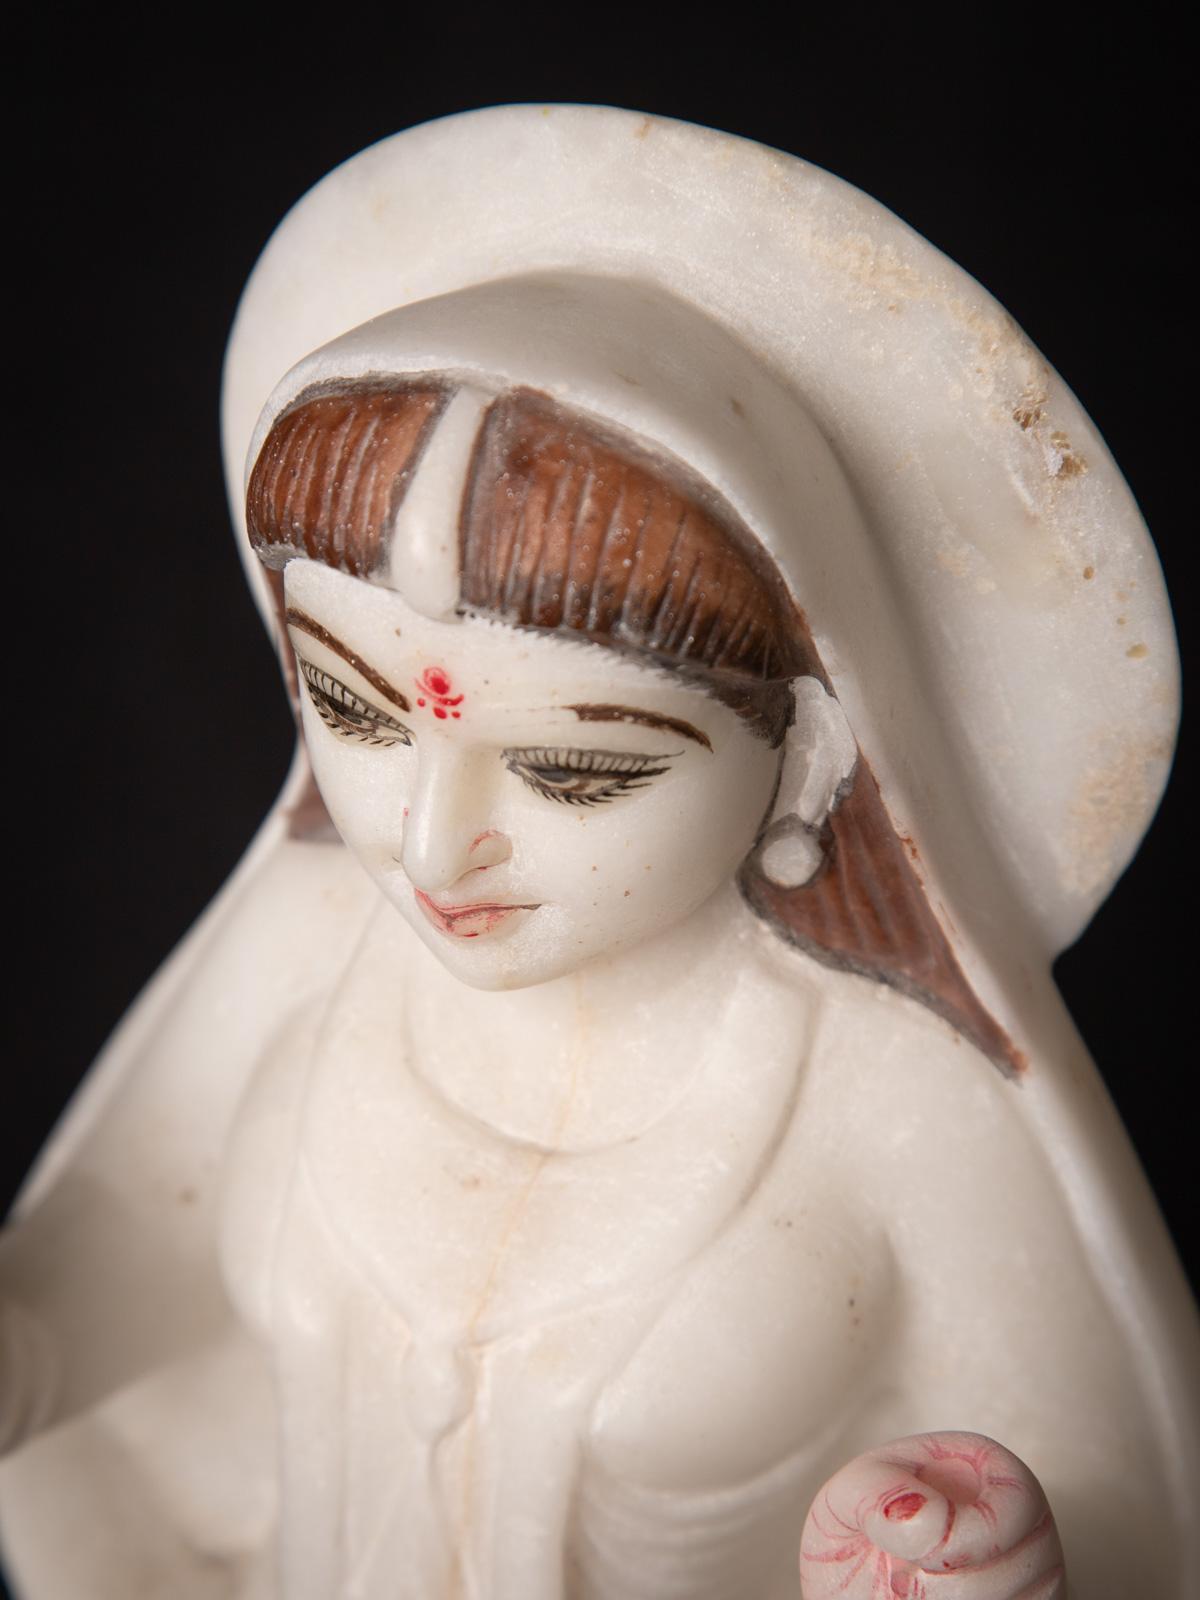 Middle 20th century Old Indian marble Khodiyar mata statue from India  14